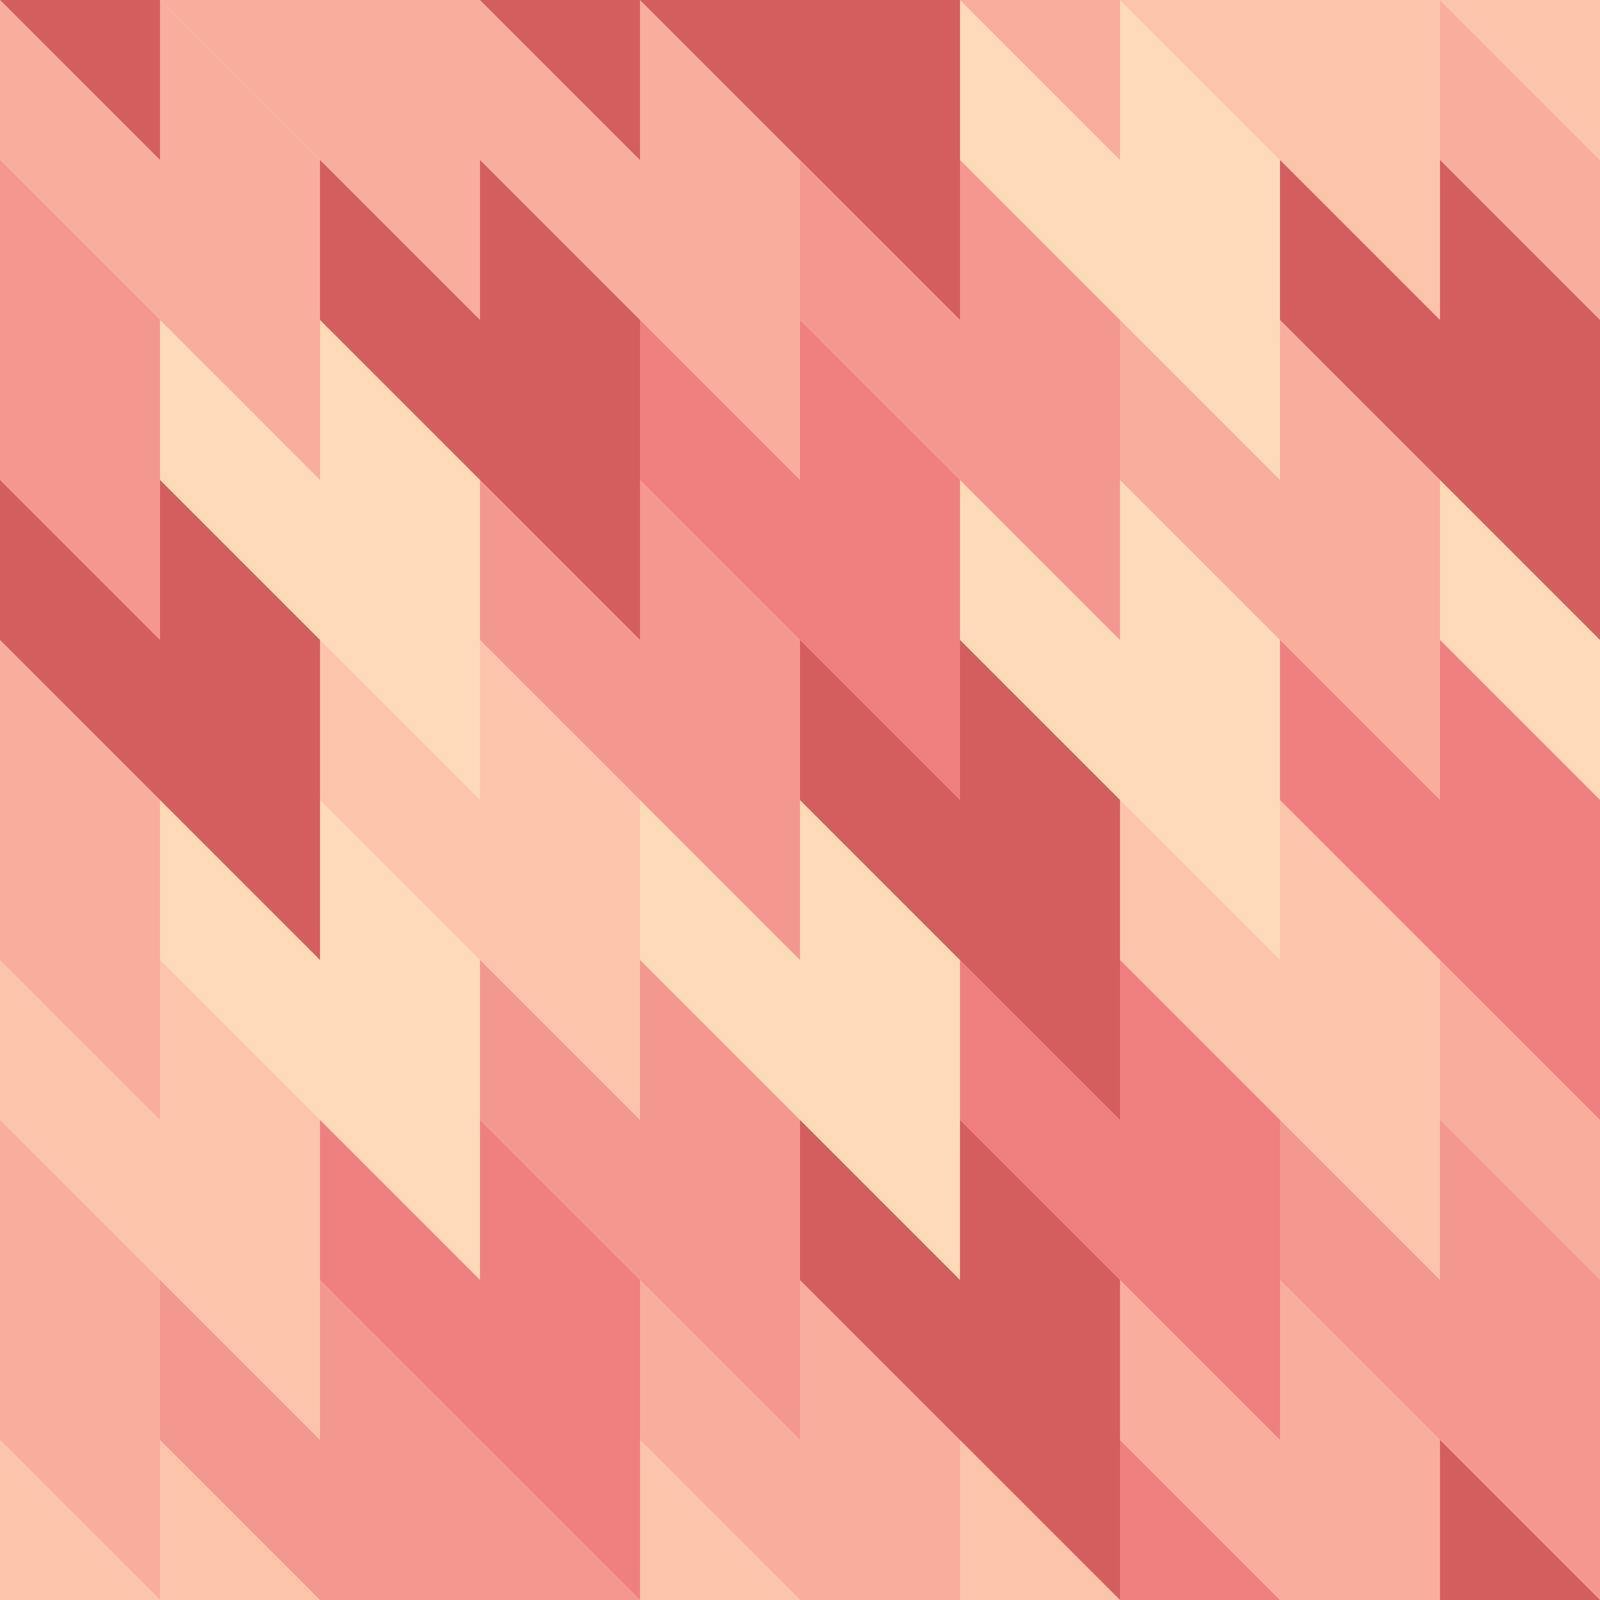 Abstract geometric pattern with stripes, lines. A vector background.